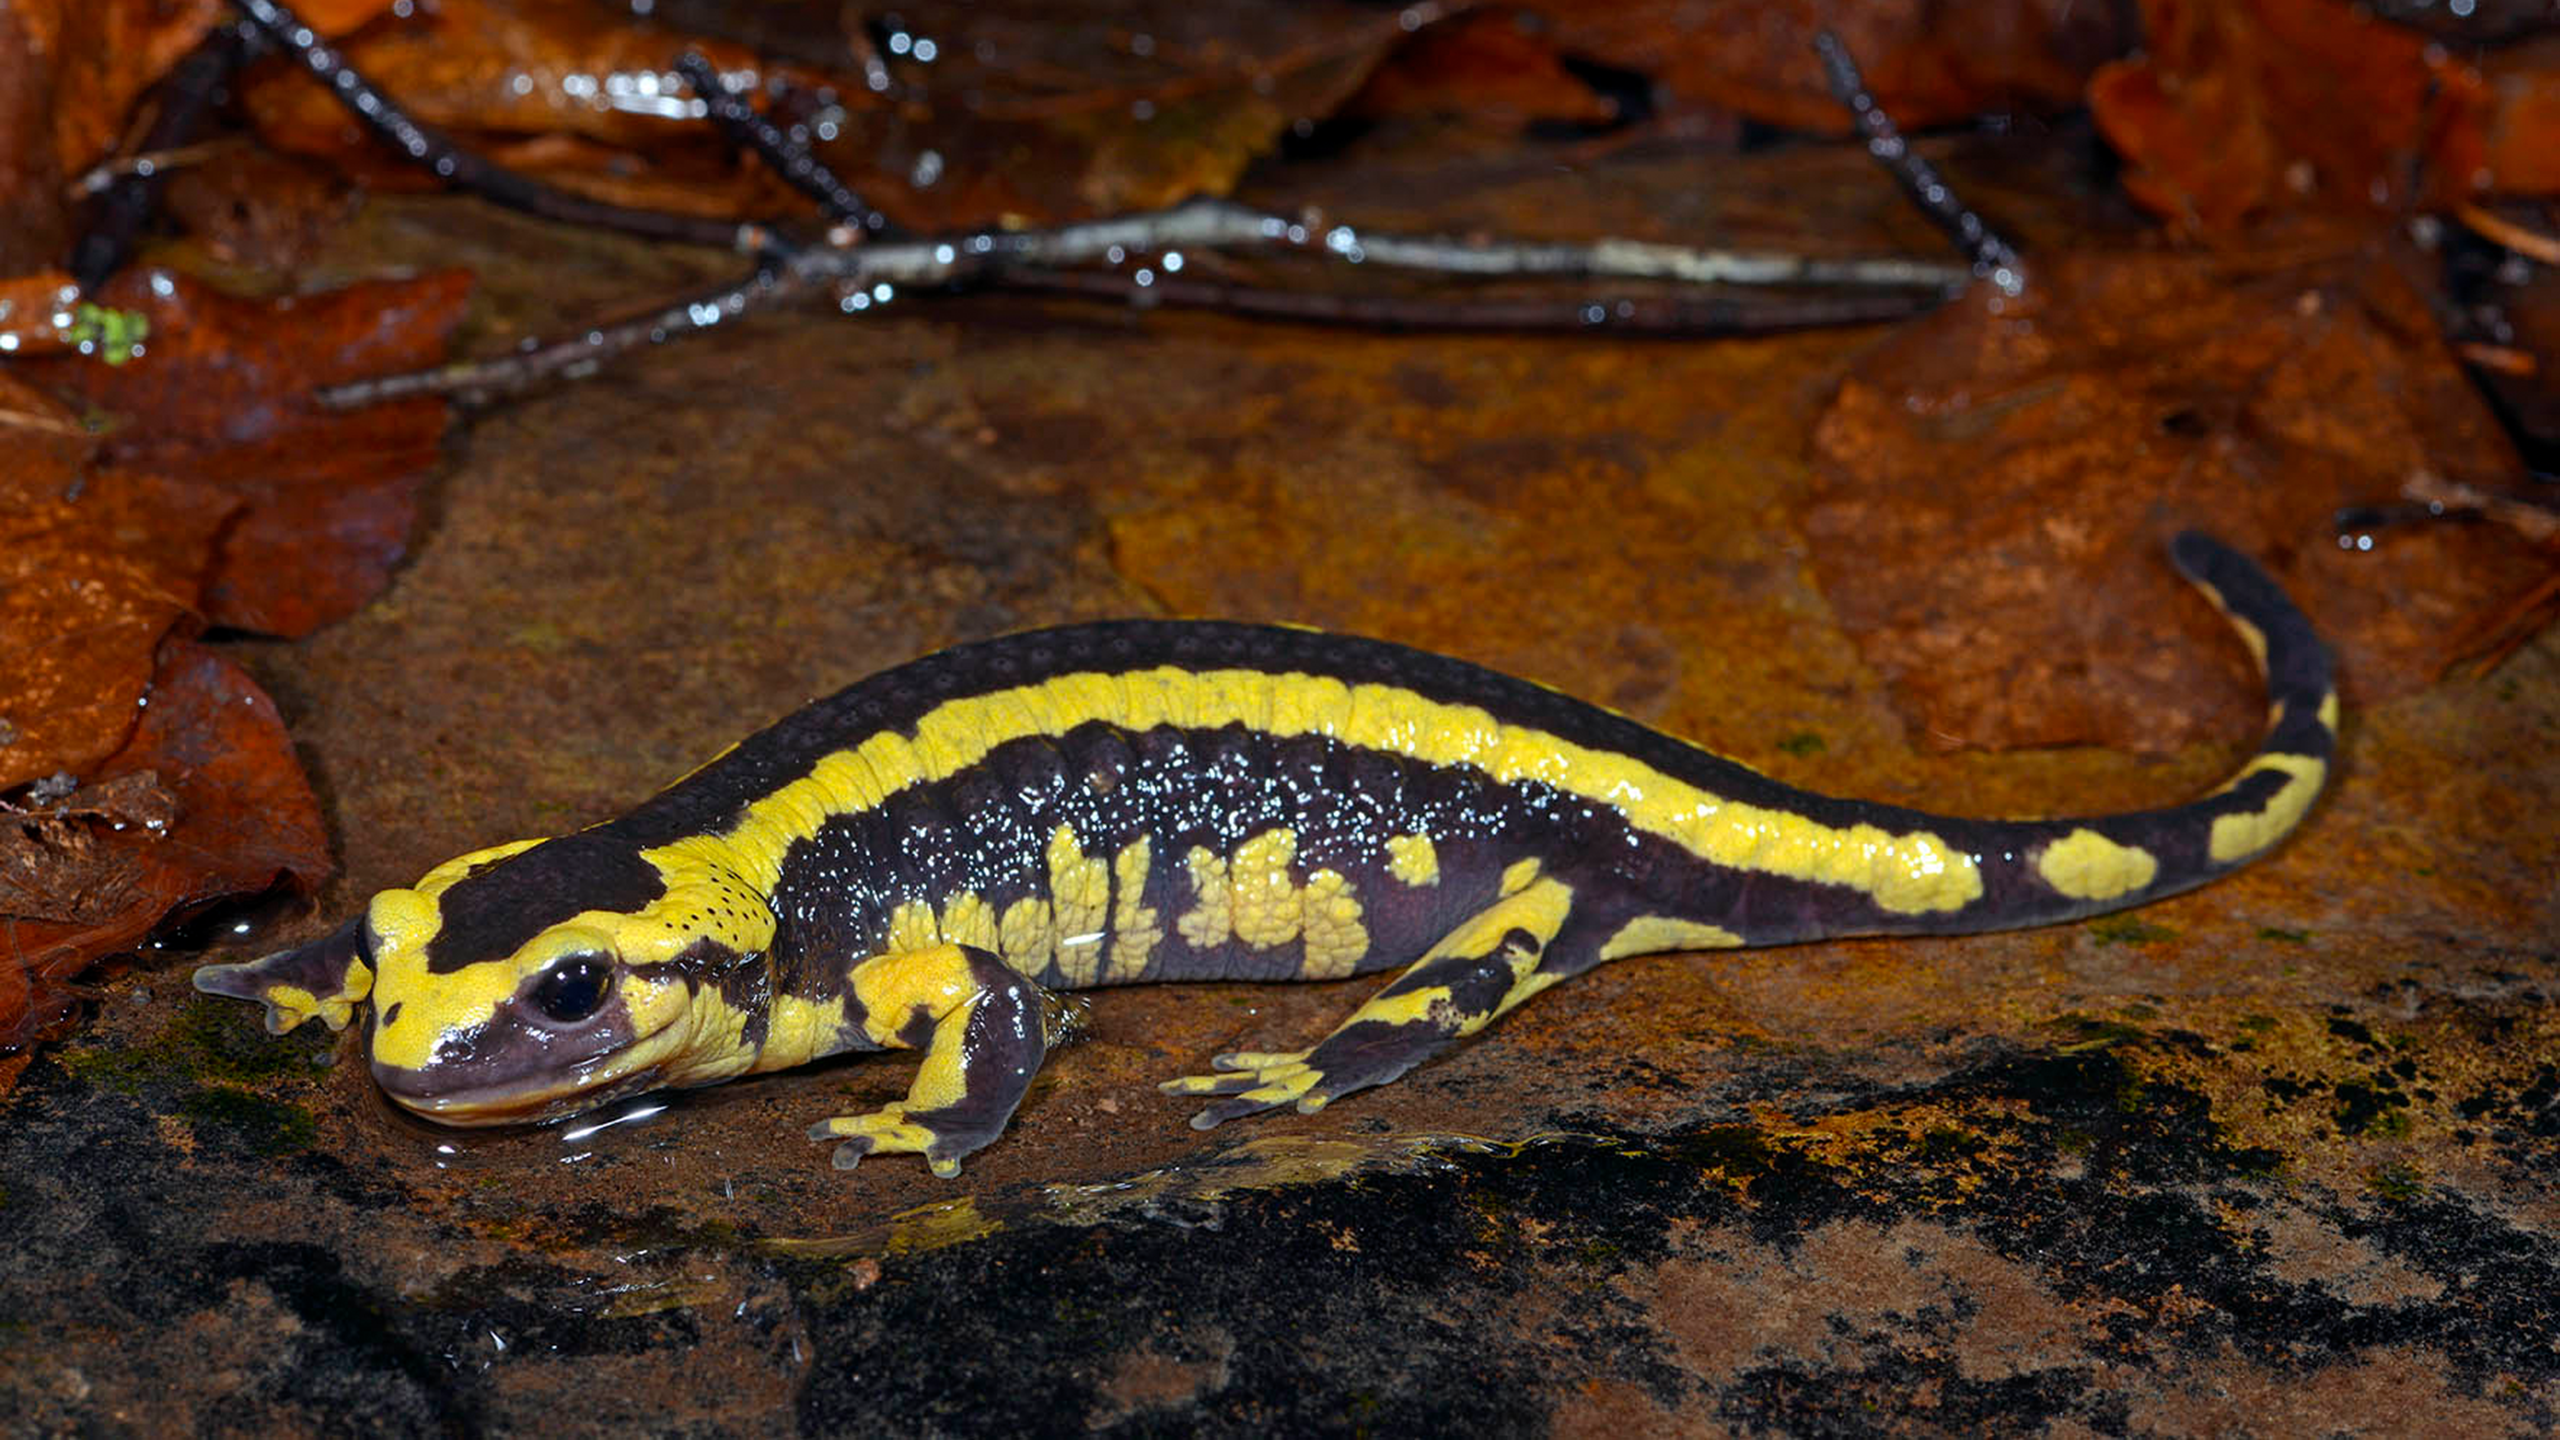 No two fire salamanders are alike. Here a Salamandra s. terrestris from Wuppertal .... | Benny Trapp 